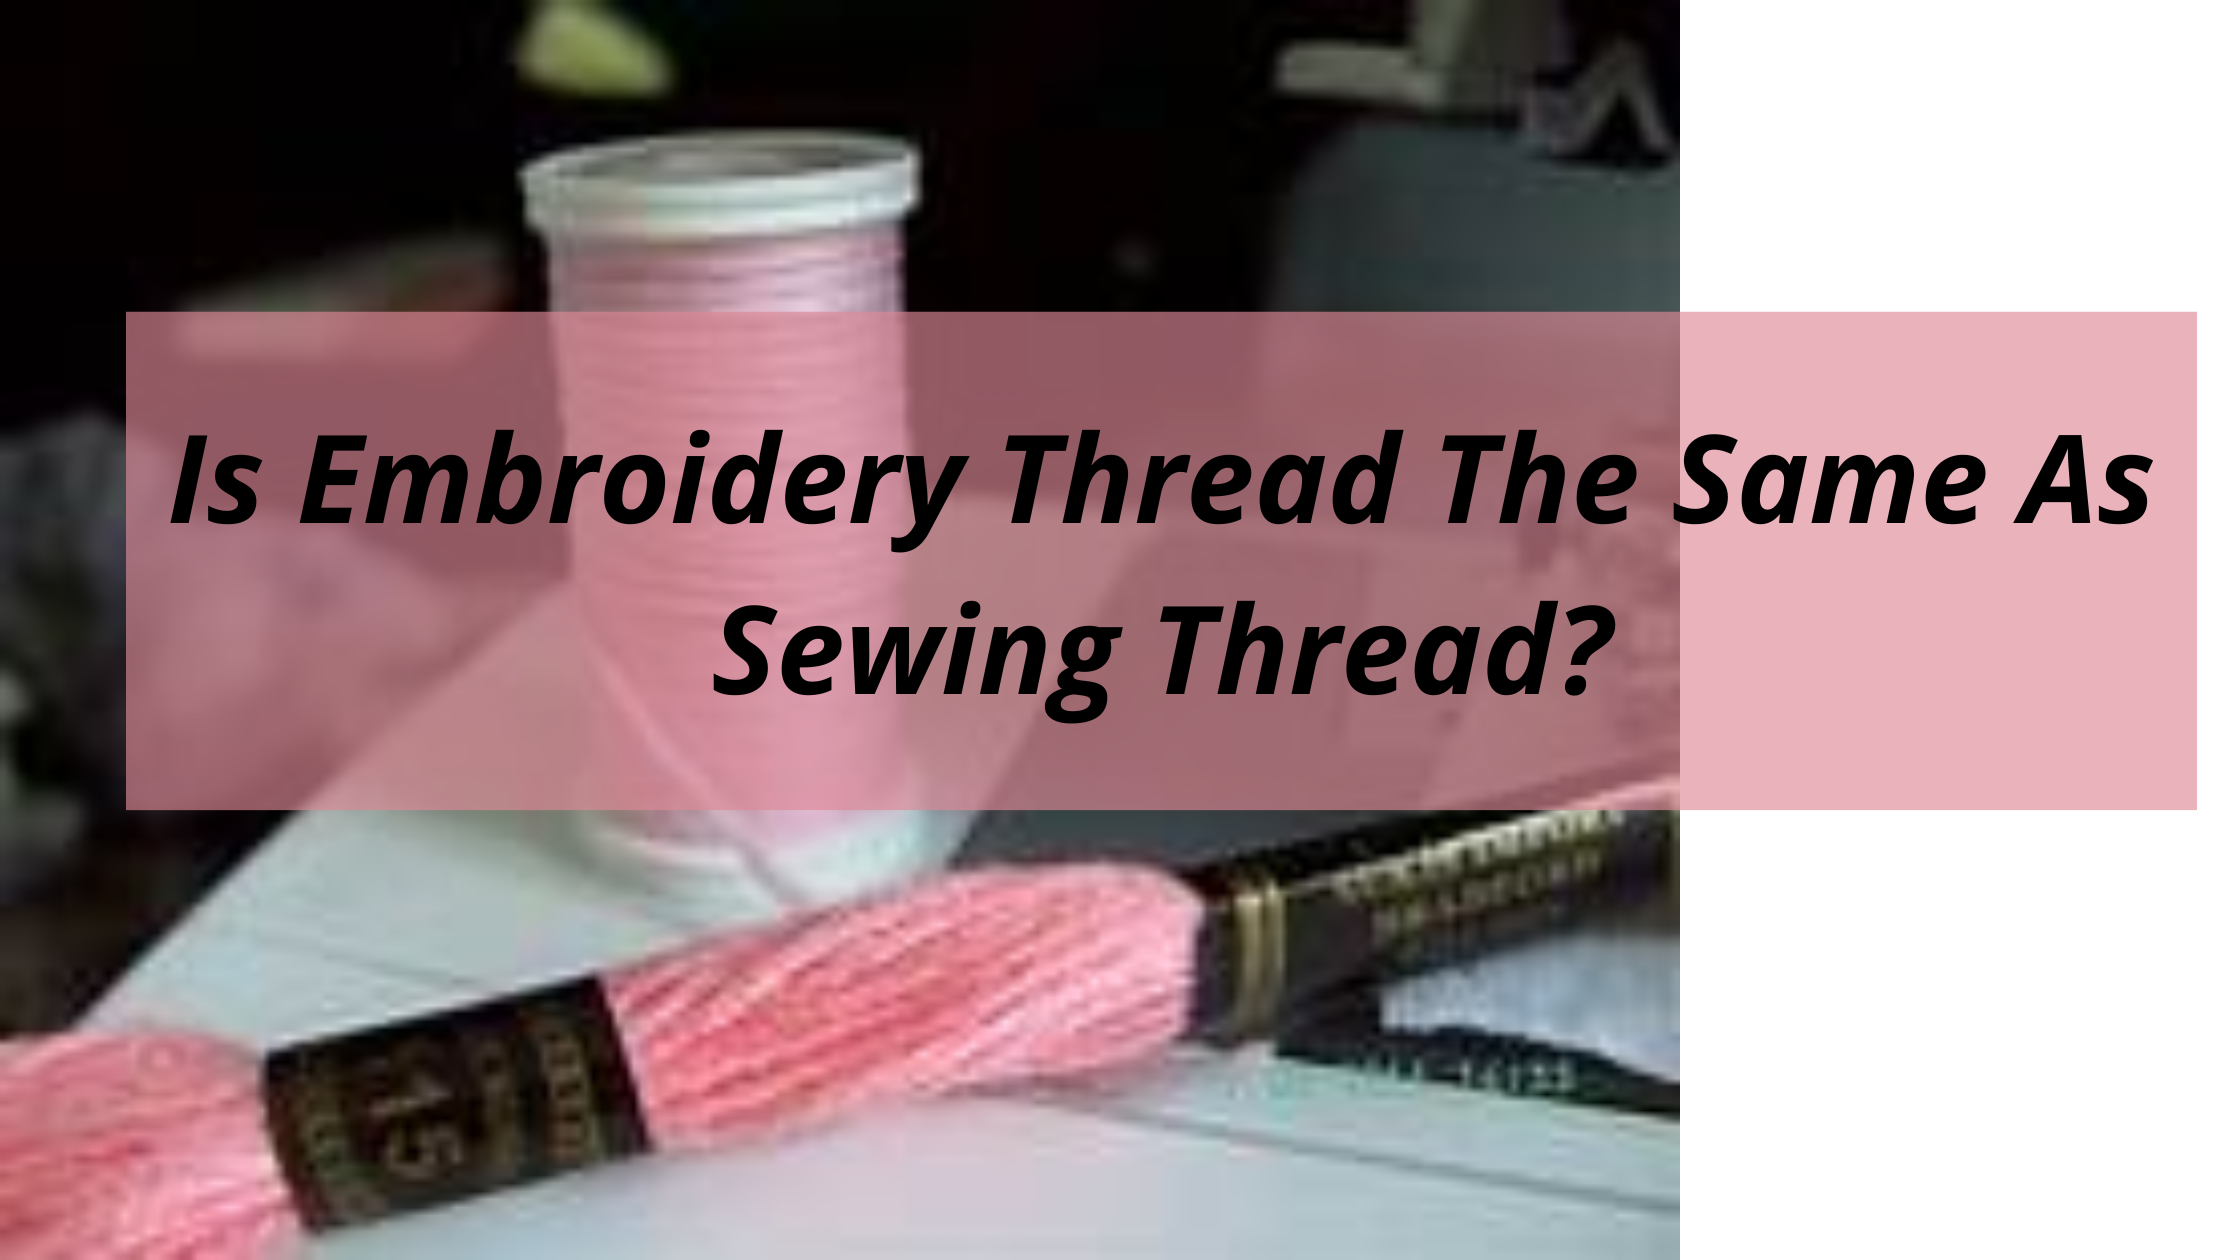 Is Embroidery Thread The Same As Sewing Thread?